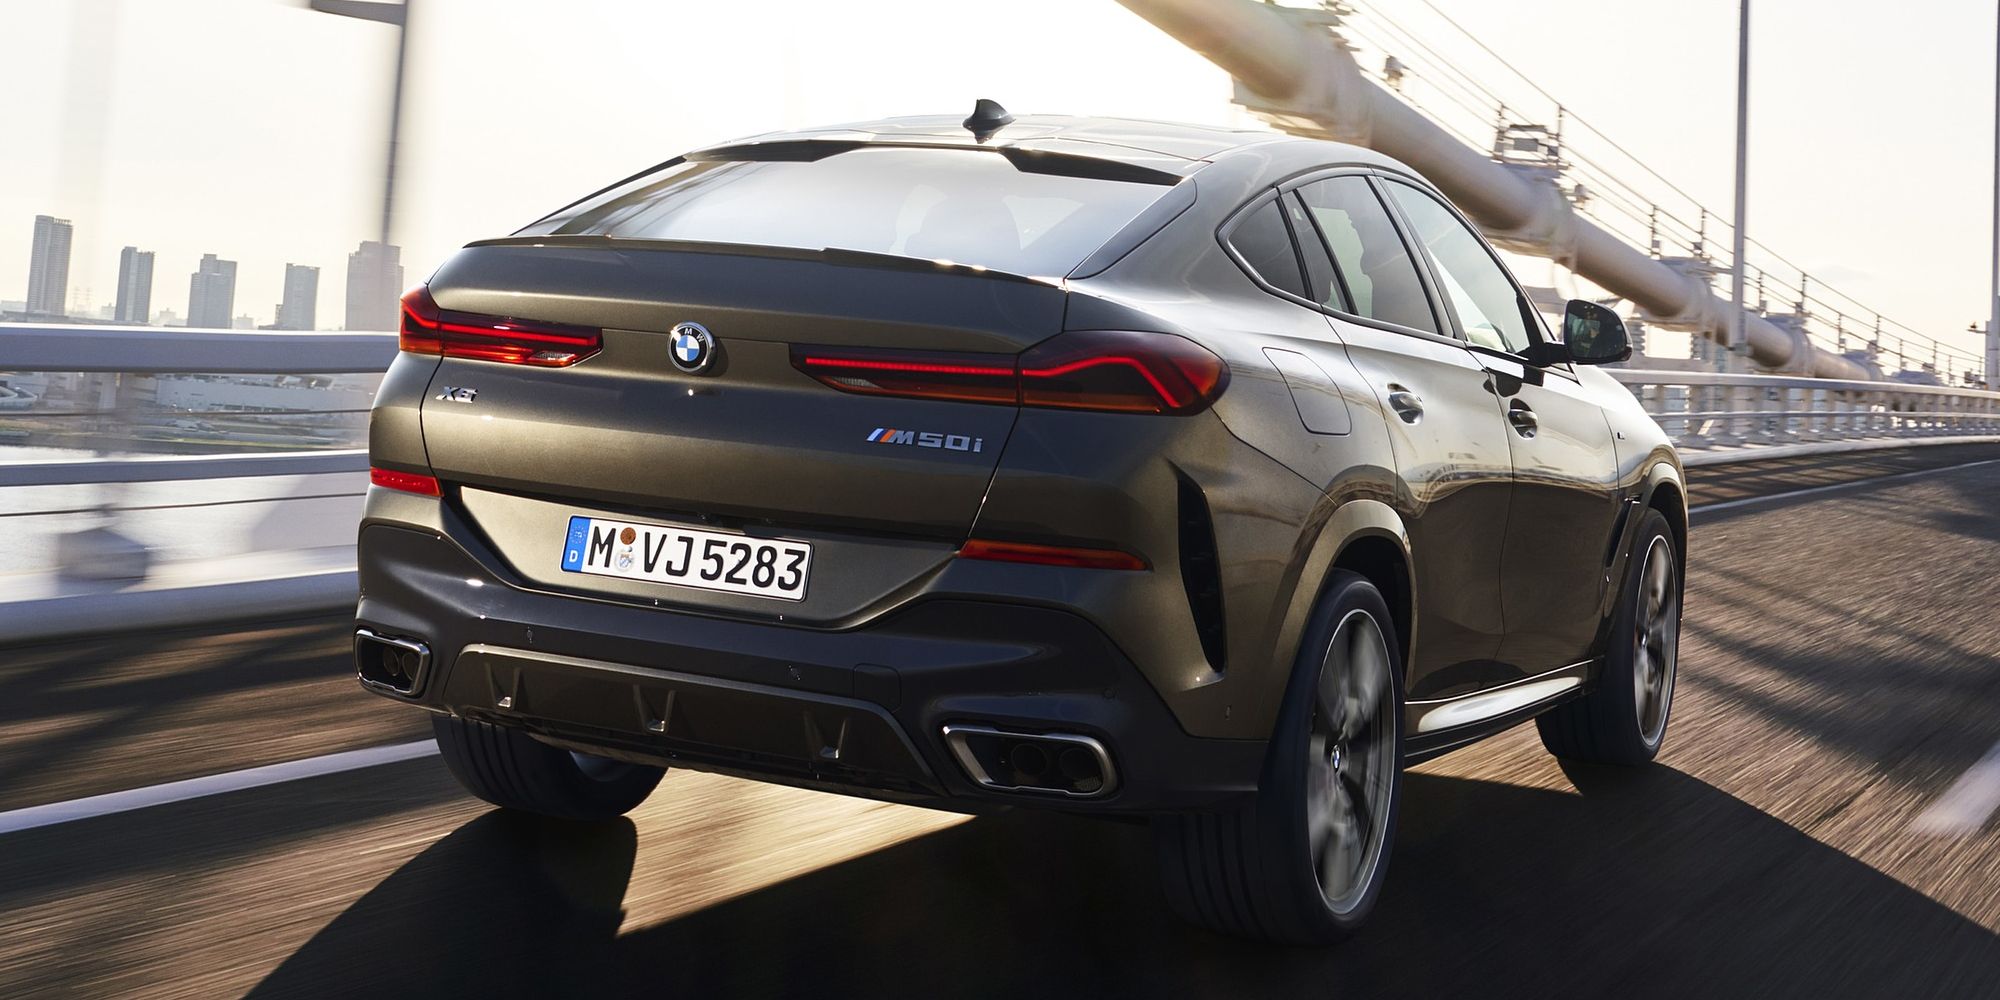 The rear of the BMW X6